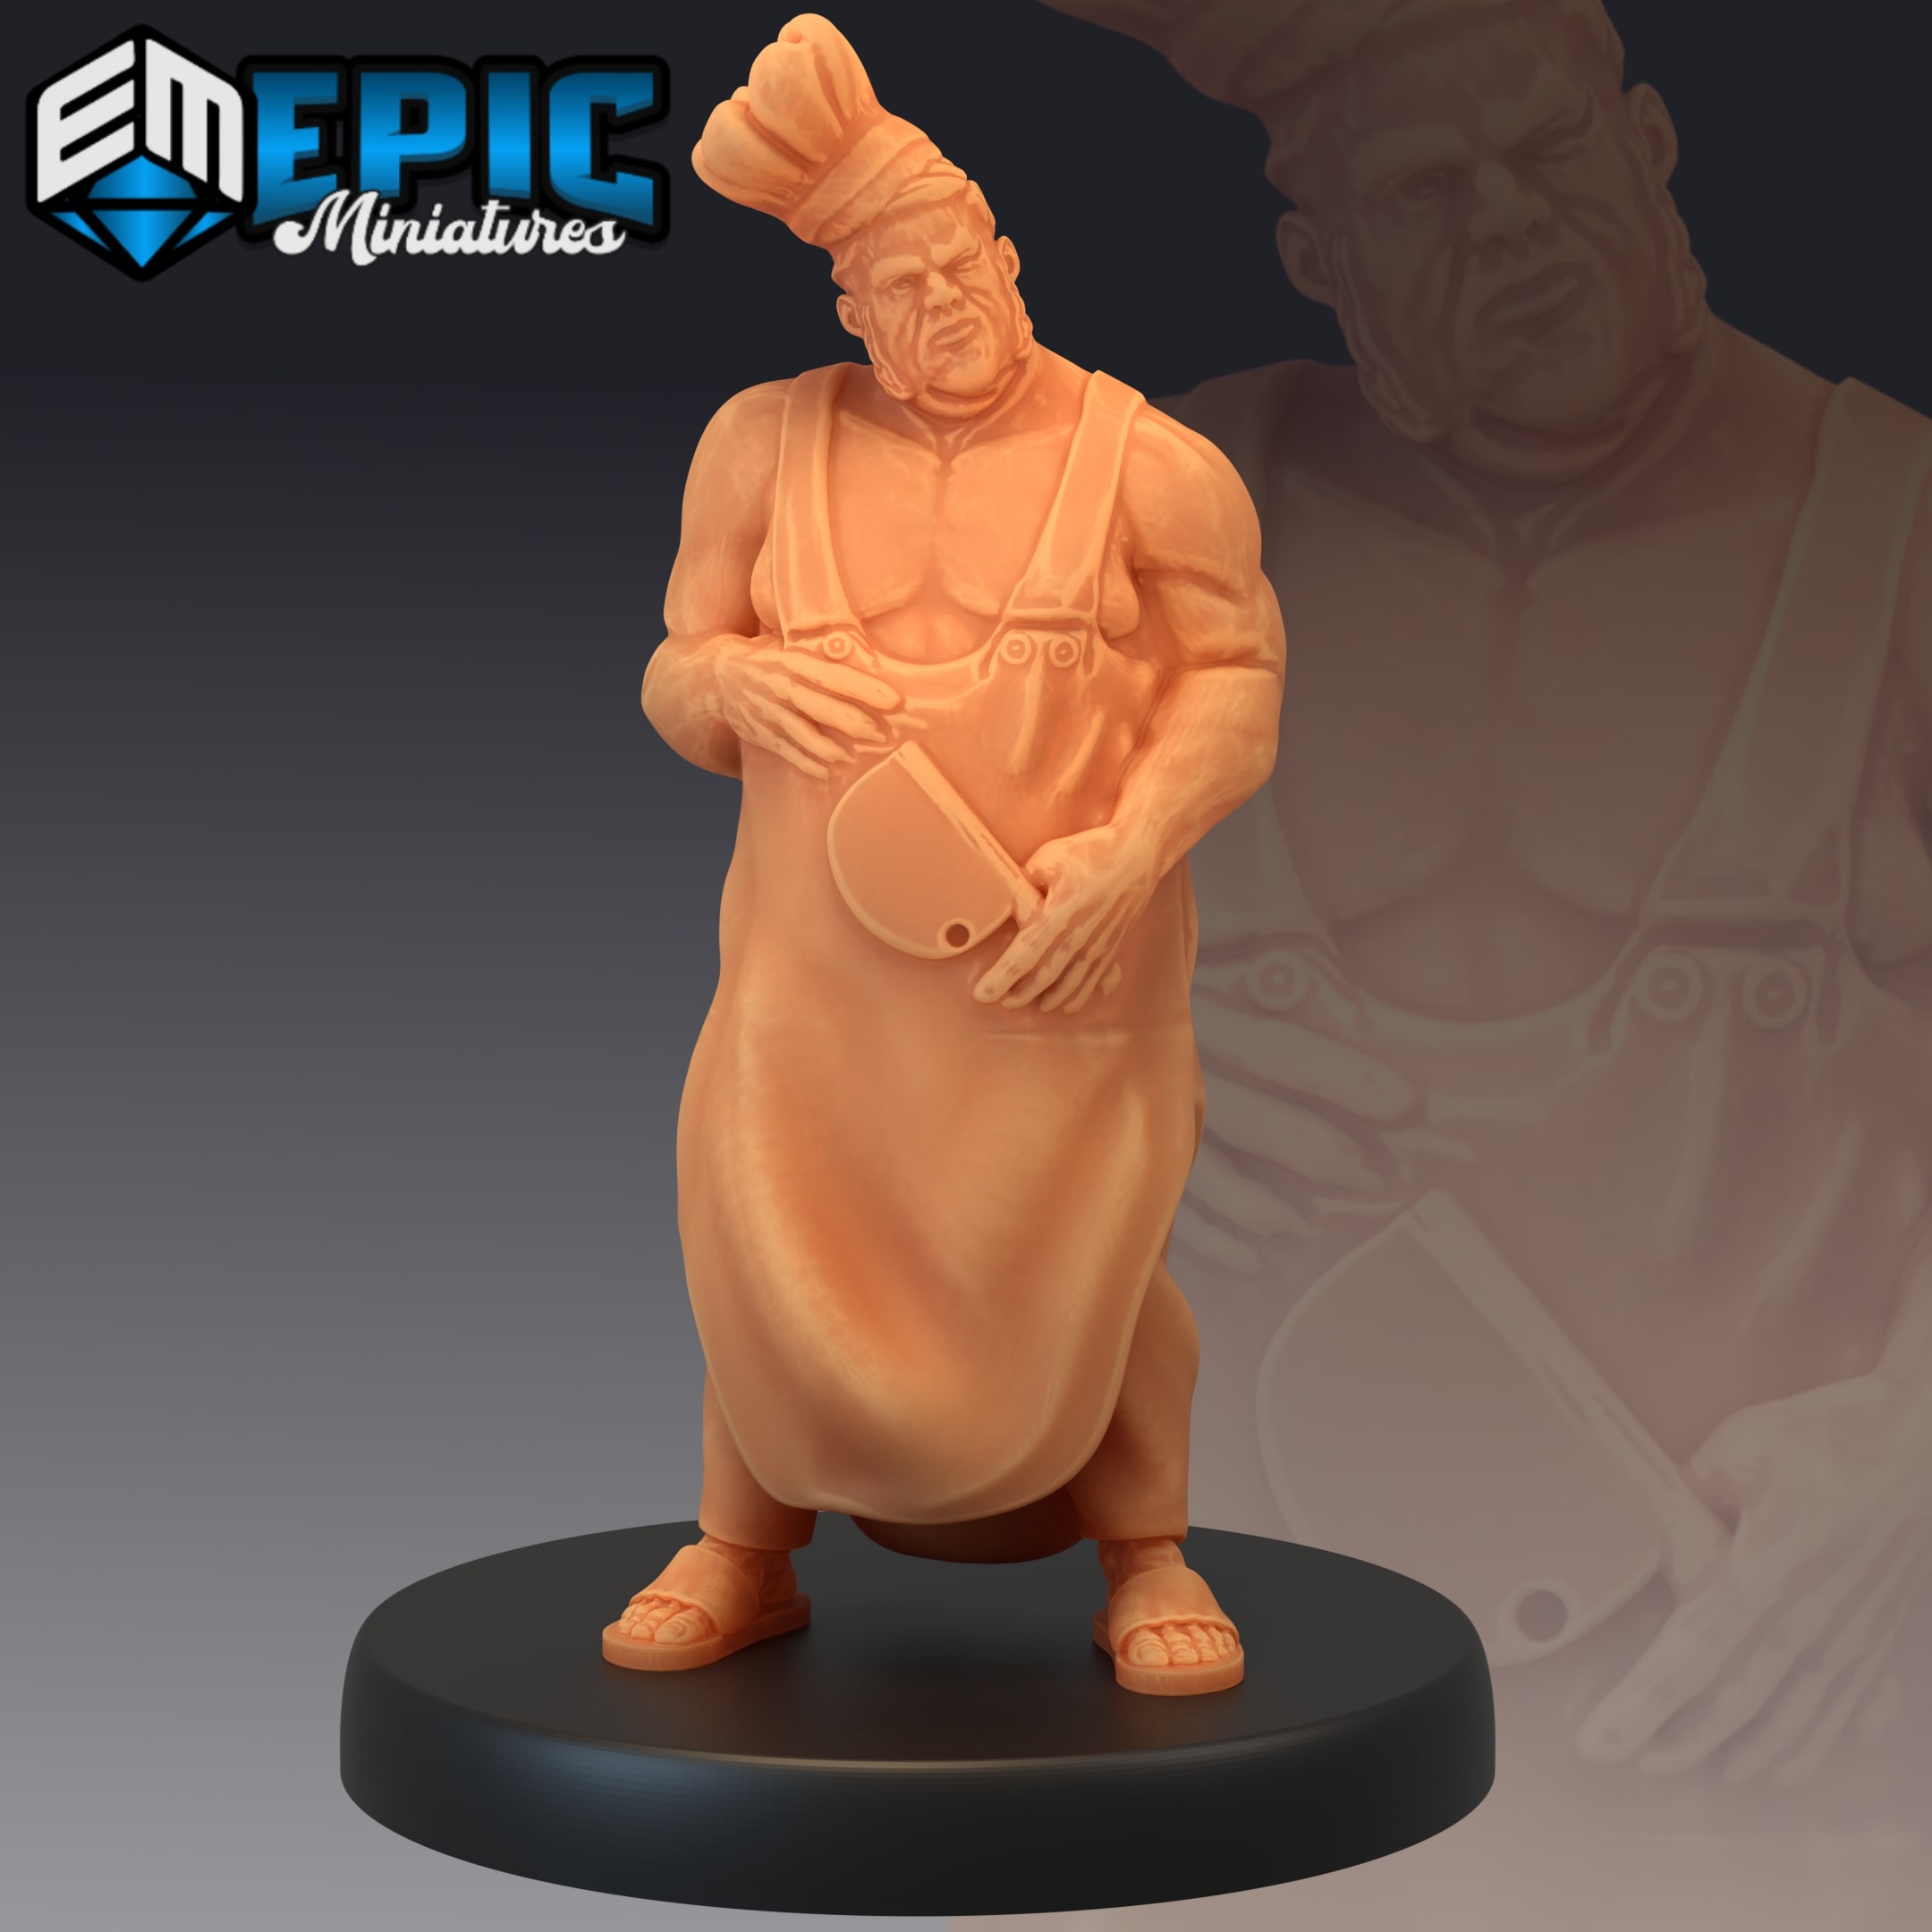 Human characters designed by epic miniatures